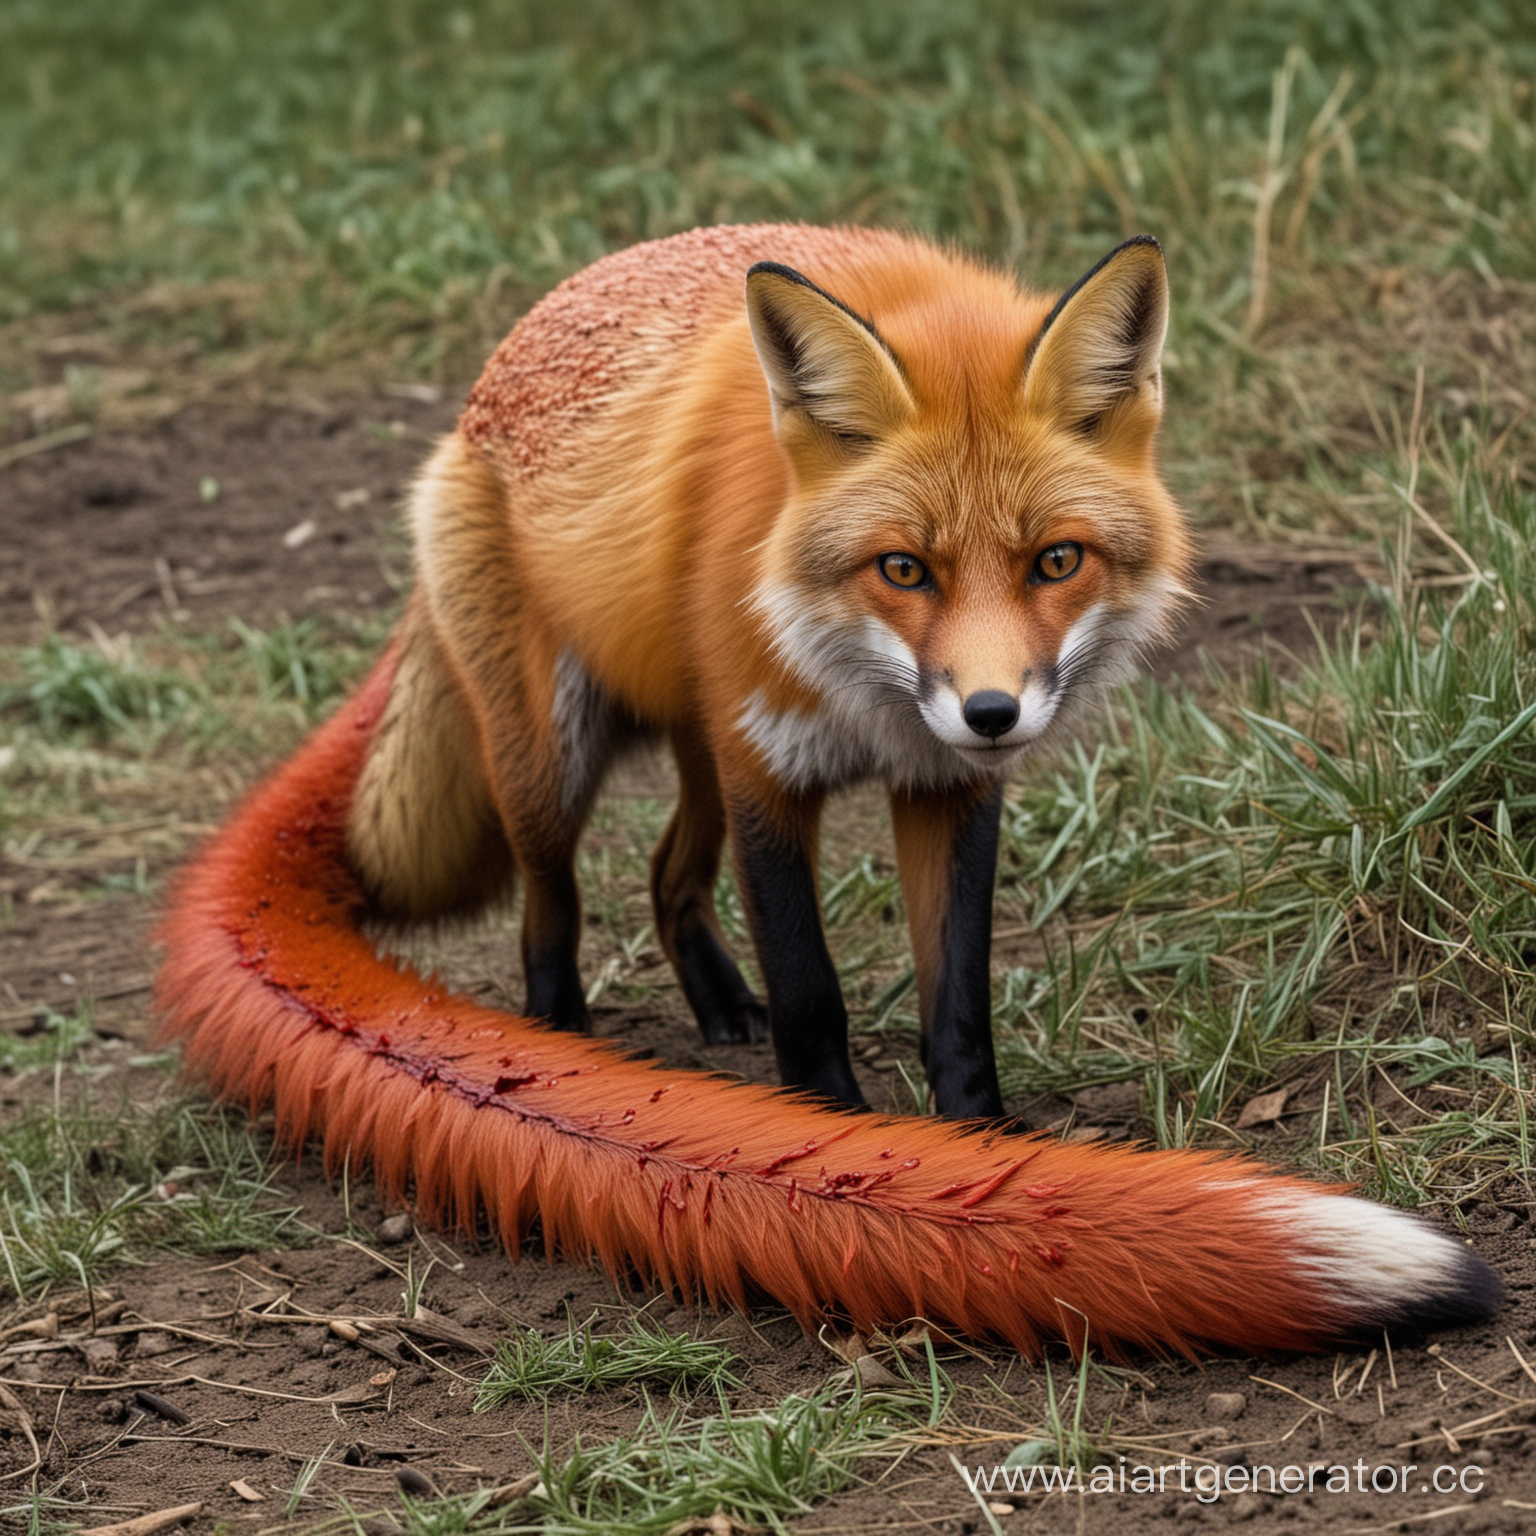 The fox's tail is covered in blood